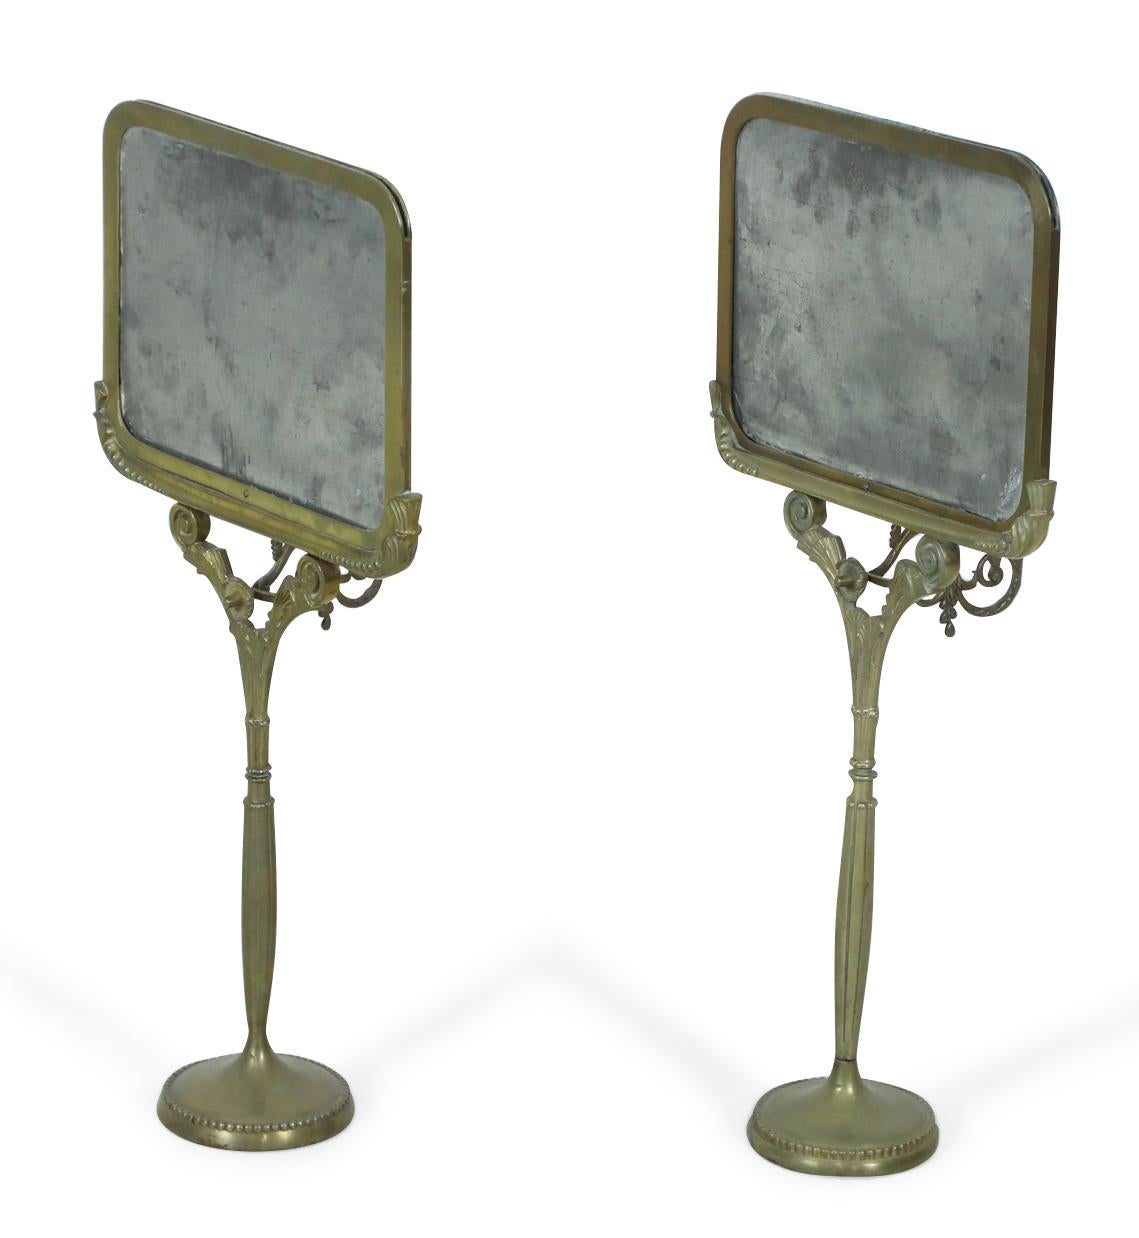 Pair of English Regency Bronze Candlestick Reflectors For Sale 1